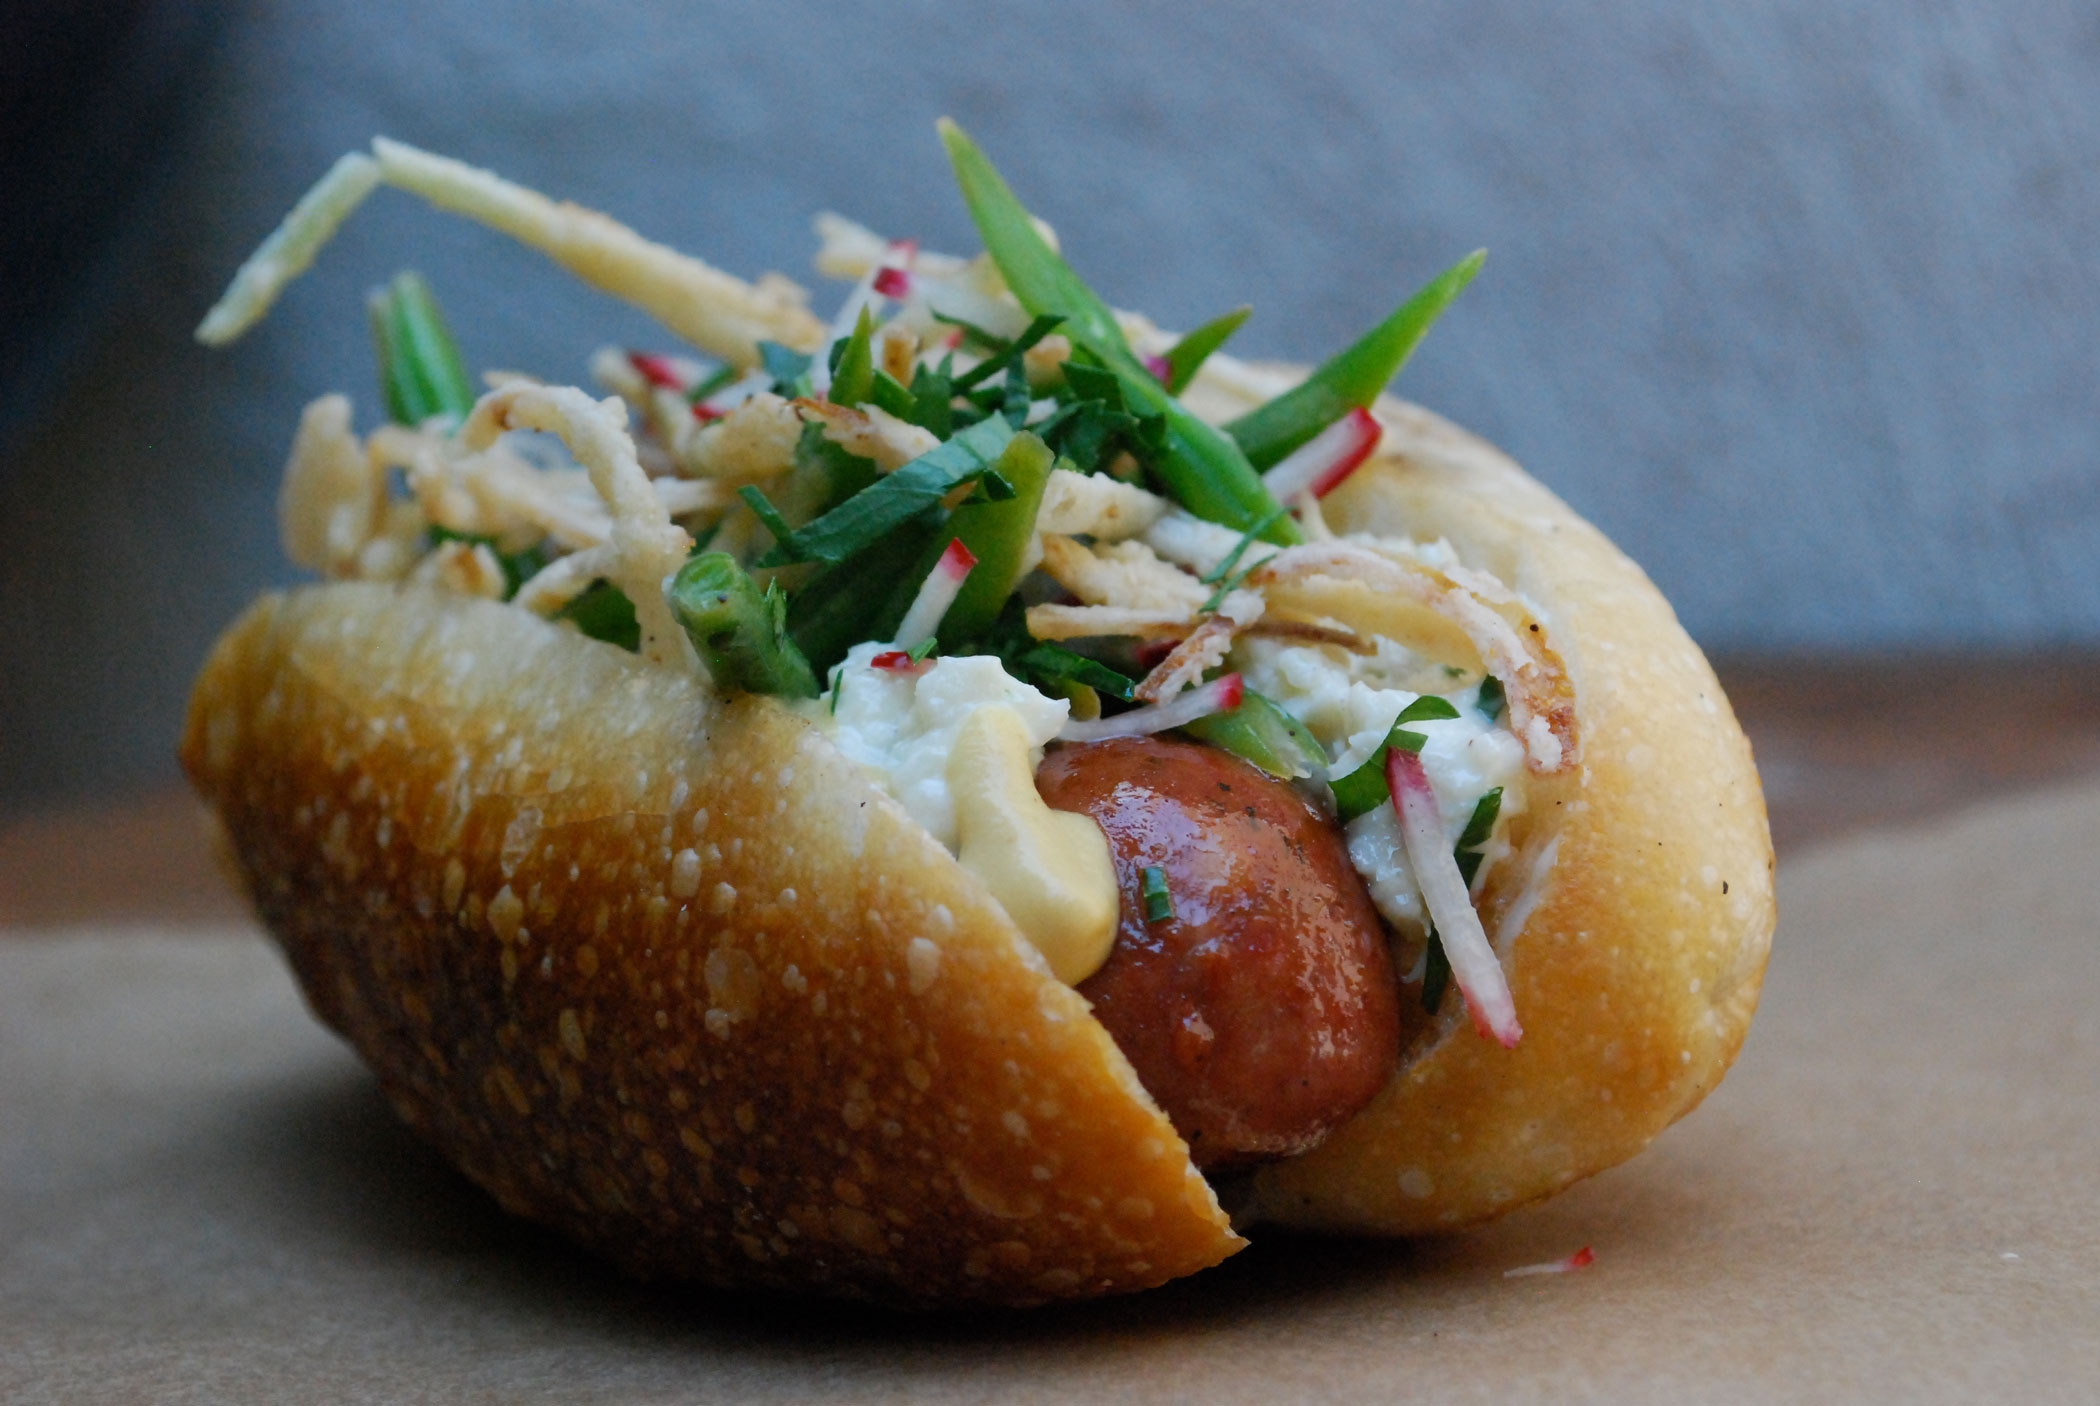 "Big French" Andouille hot dog